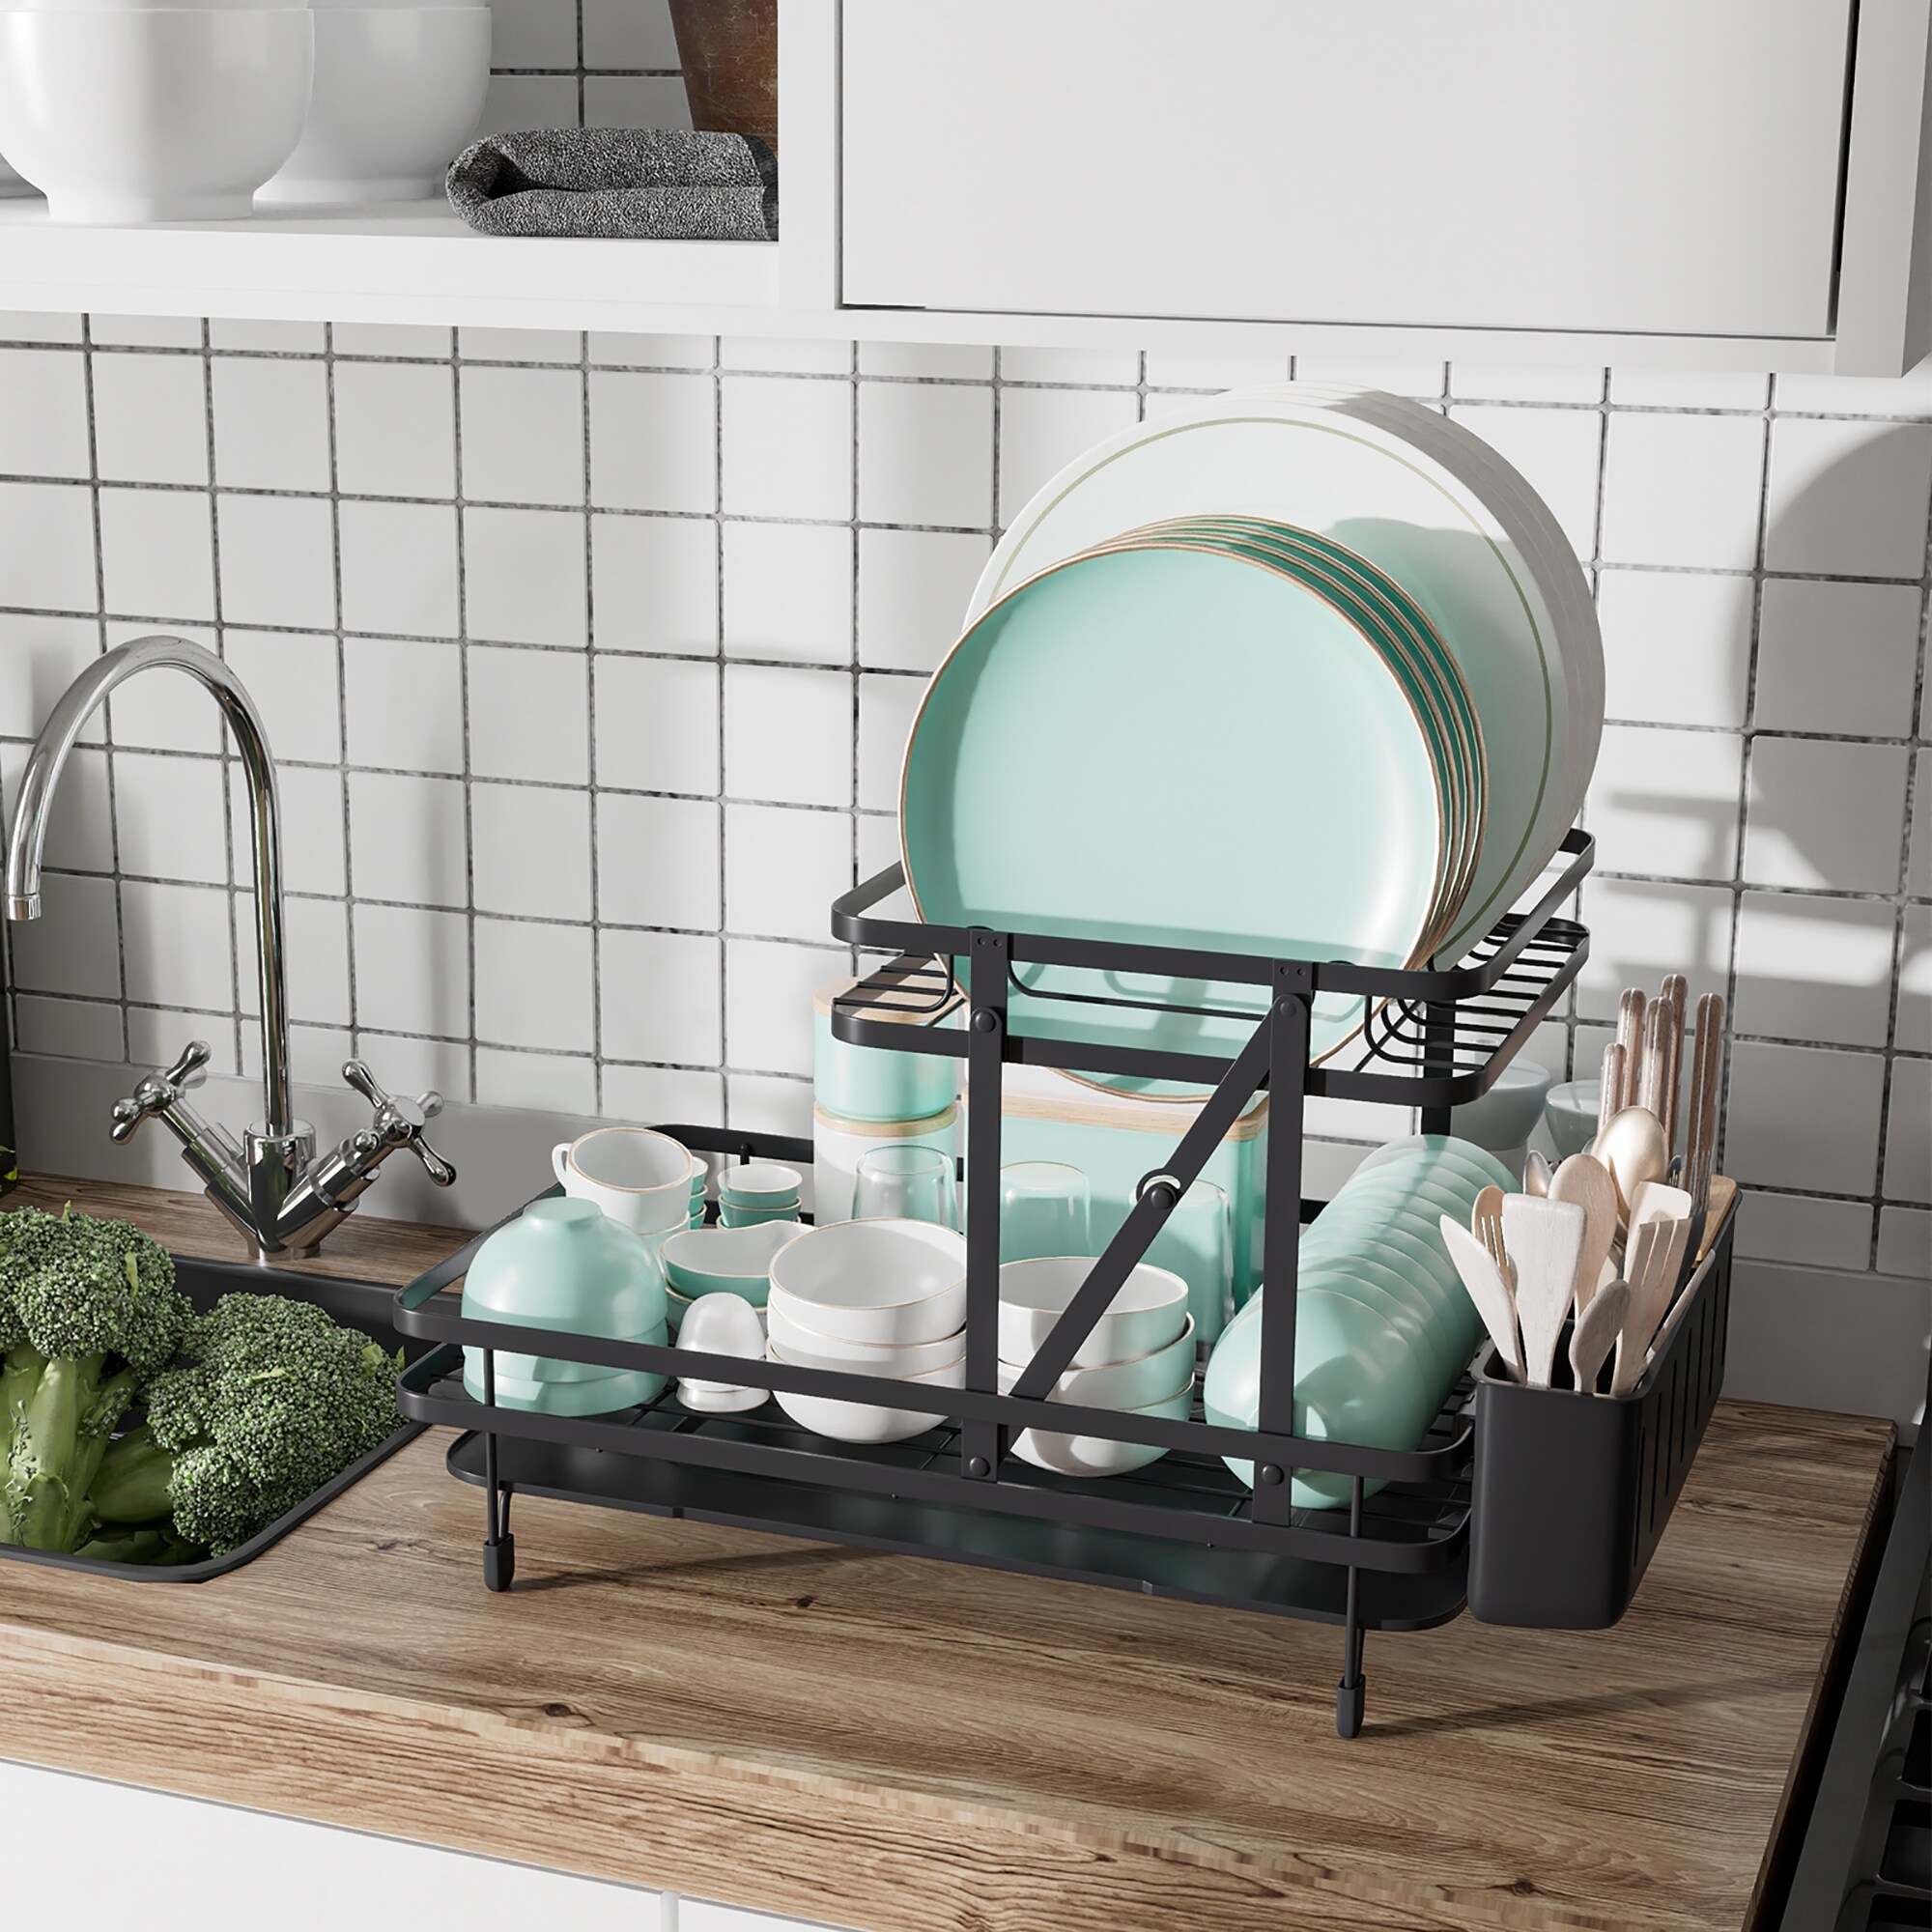 https://ak1.ostkcdn.com/images/products/is/images/direct/792c0ff64589753e1ddcec2bd79556be1f4fce43/Costway-Dish-Drying-Rack-Collapsible-2-Tier-Dish-Rack-and-Drainboard.jpg